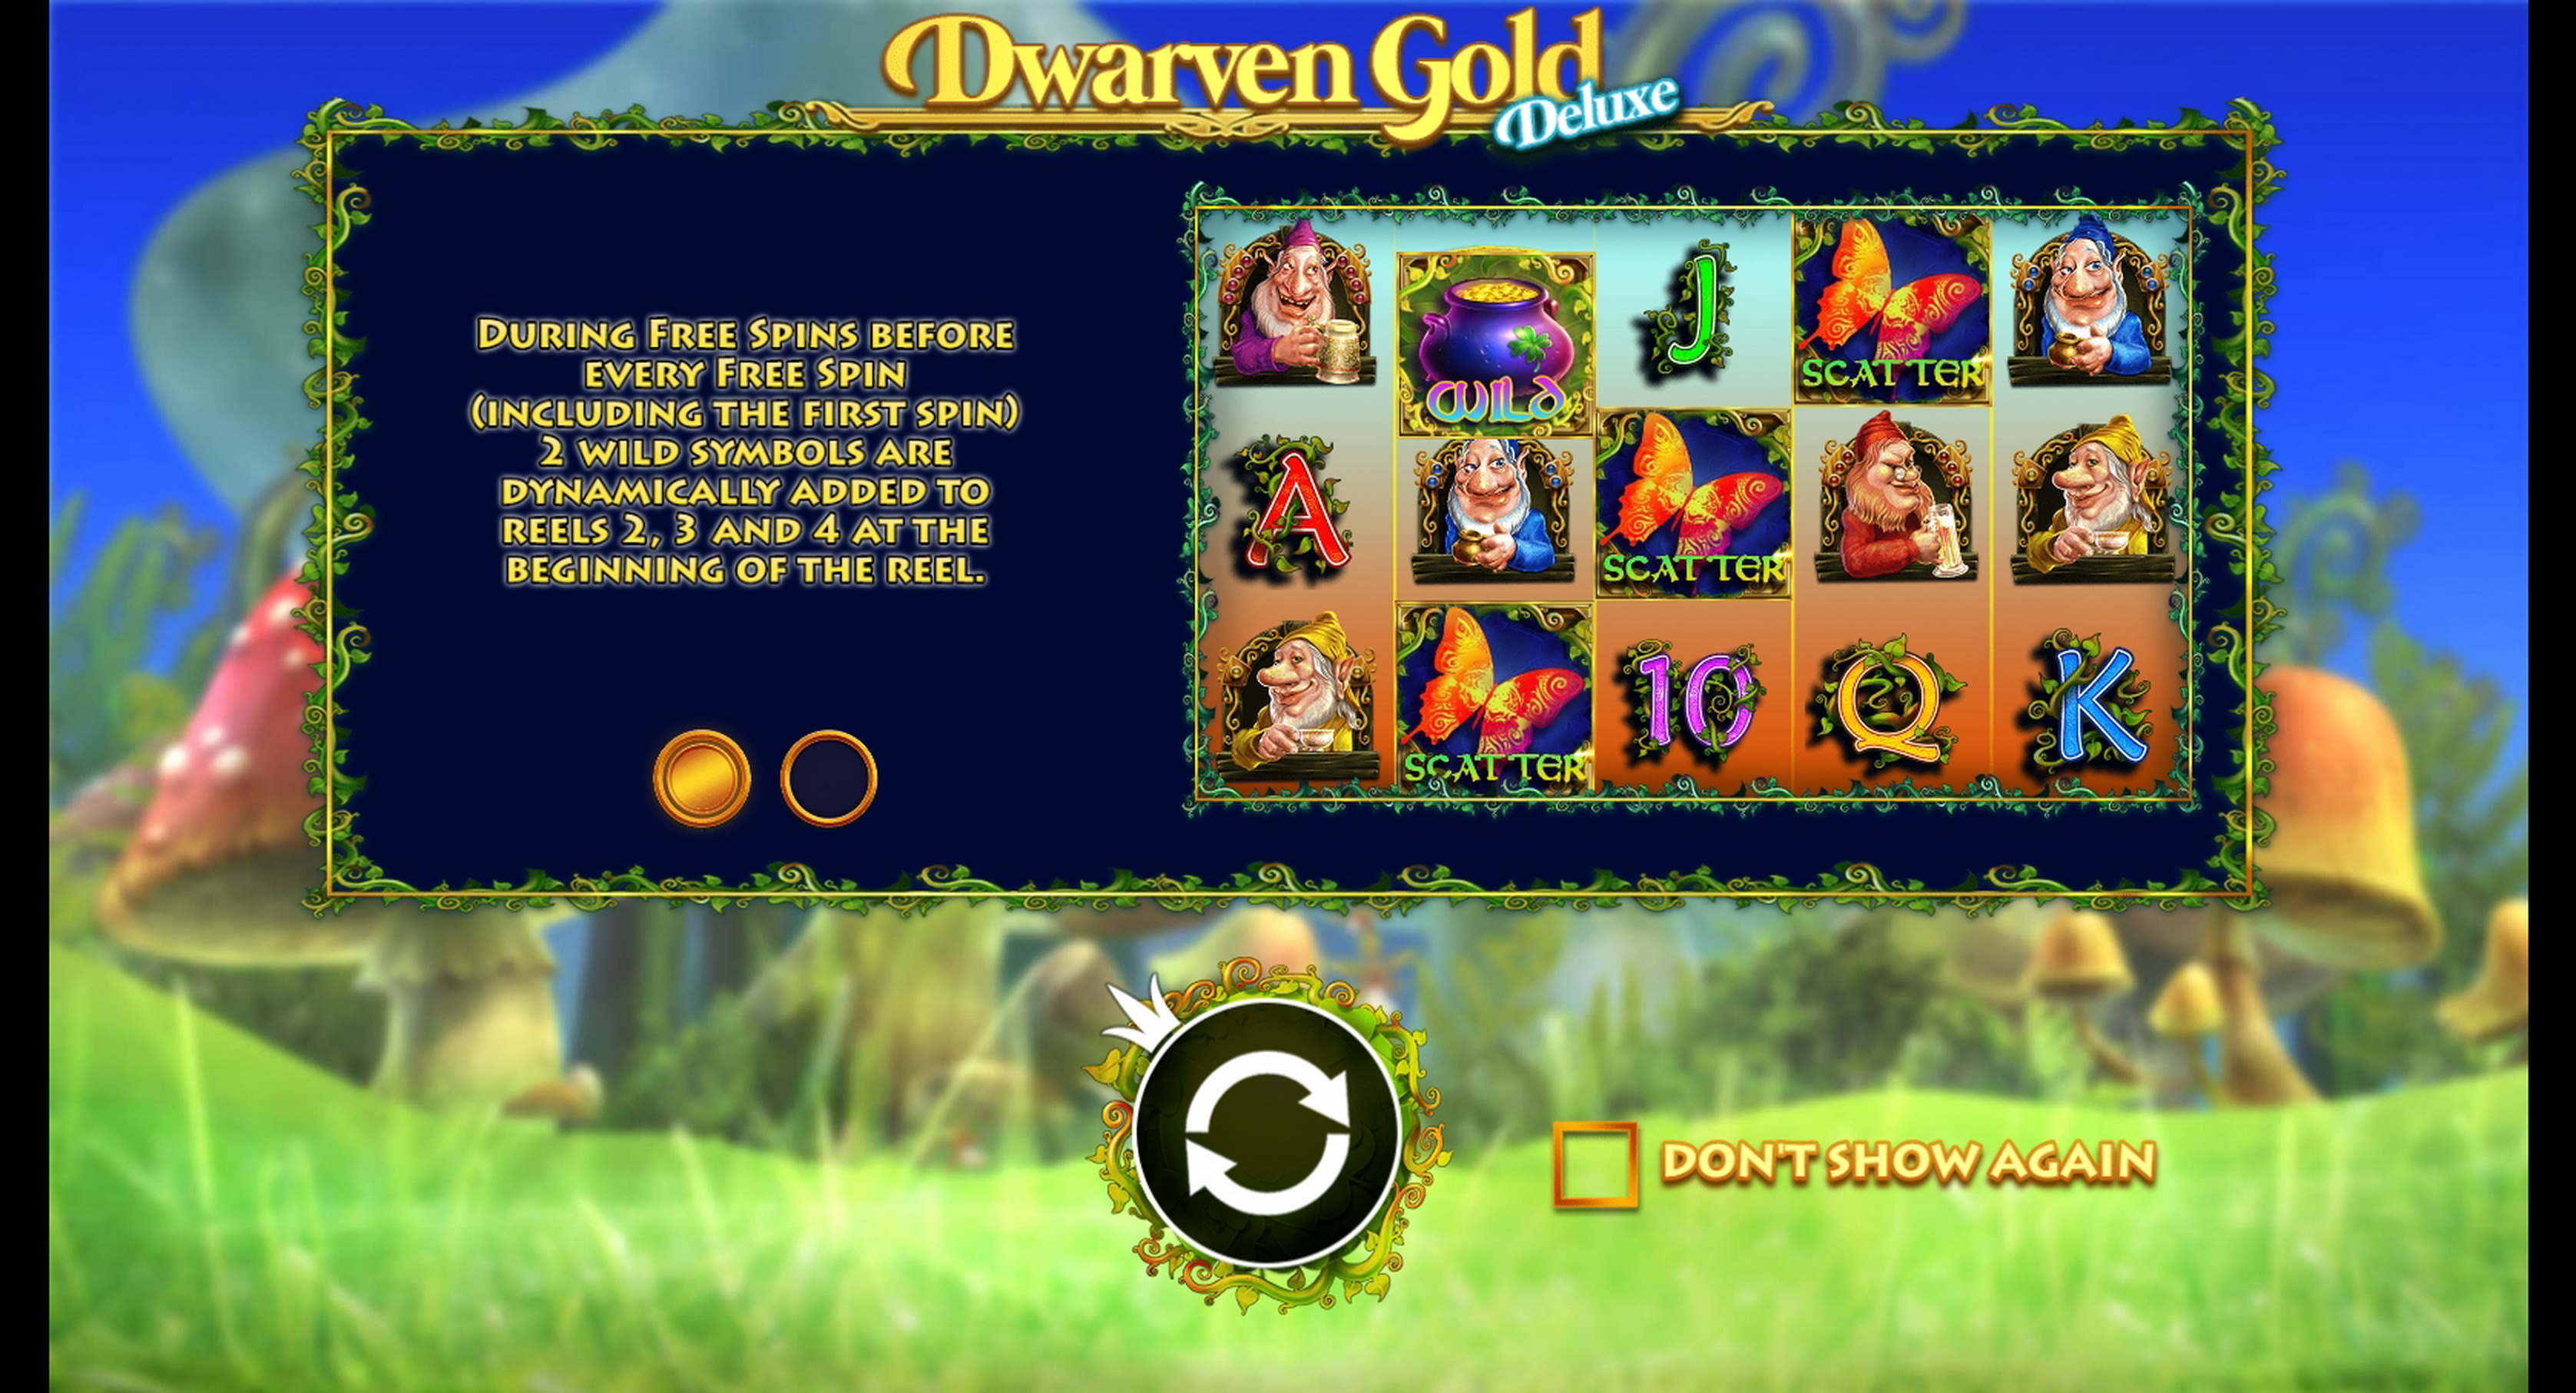 Play Dwarven Gold Deluxe Free Casino Slot Game by Pragmatic Play